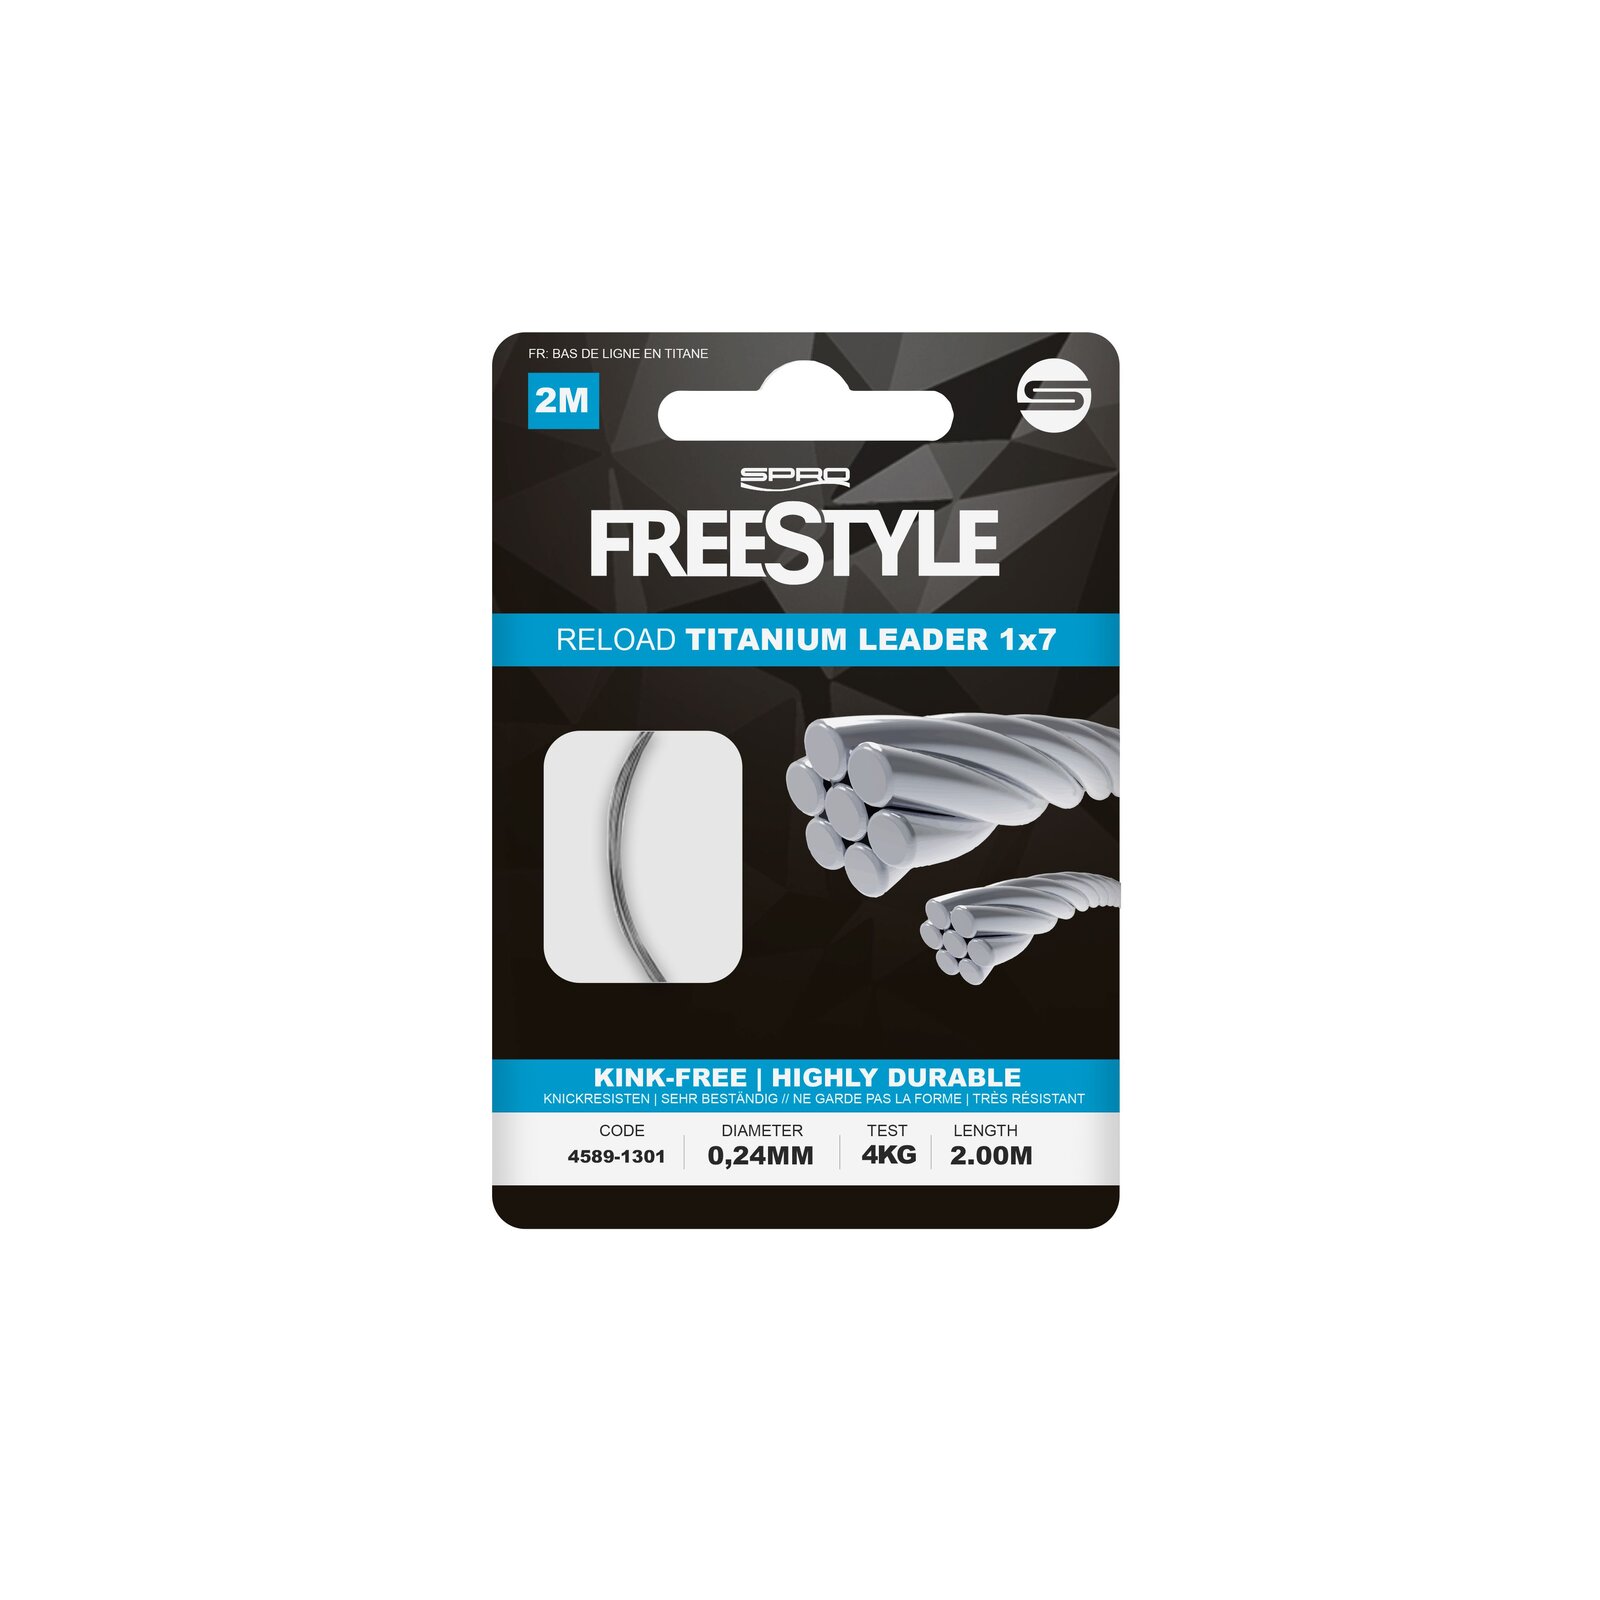 SPRO Freesytle Reload Titanium Leader 1x7